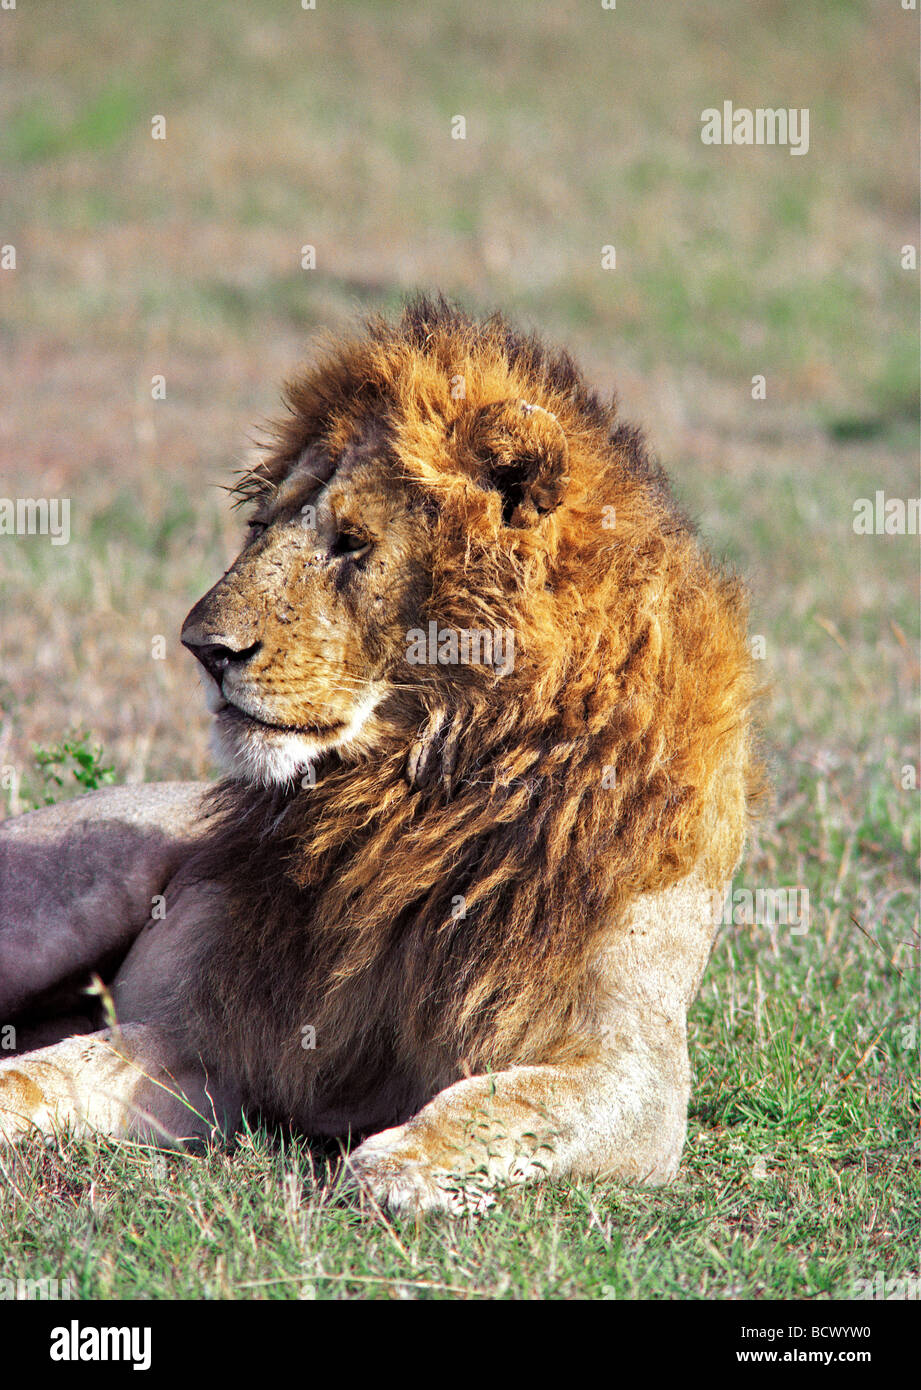 Large alert mature male Lion with fine mane sitting with head up looking into distance Masai Mara National Reserve Kenya Africa Stock Photo